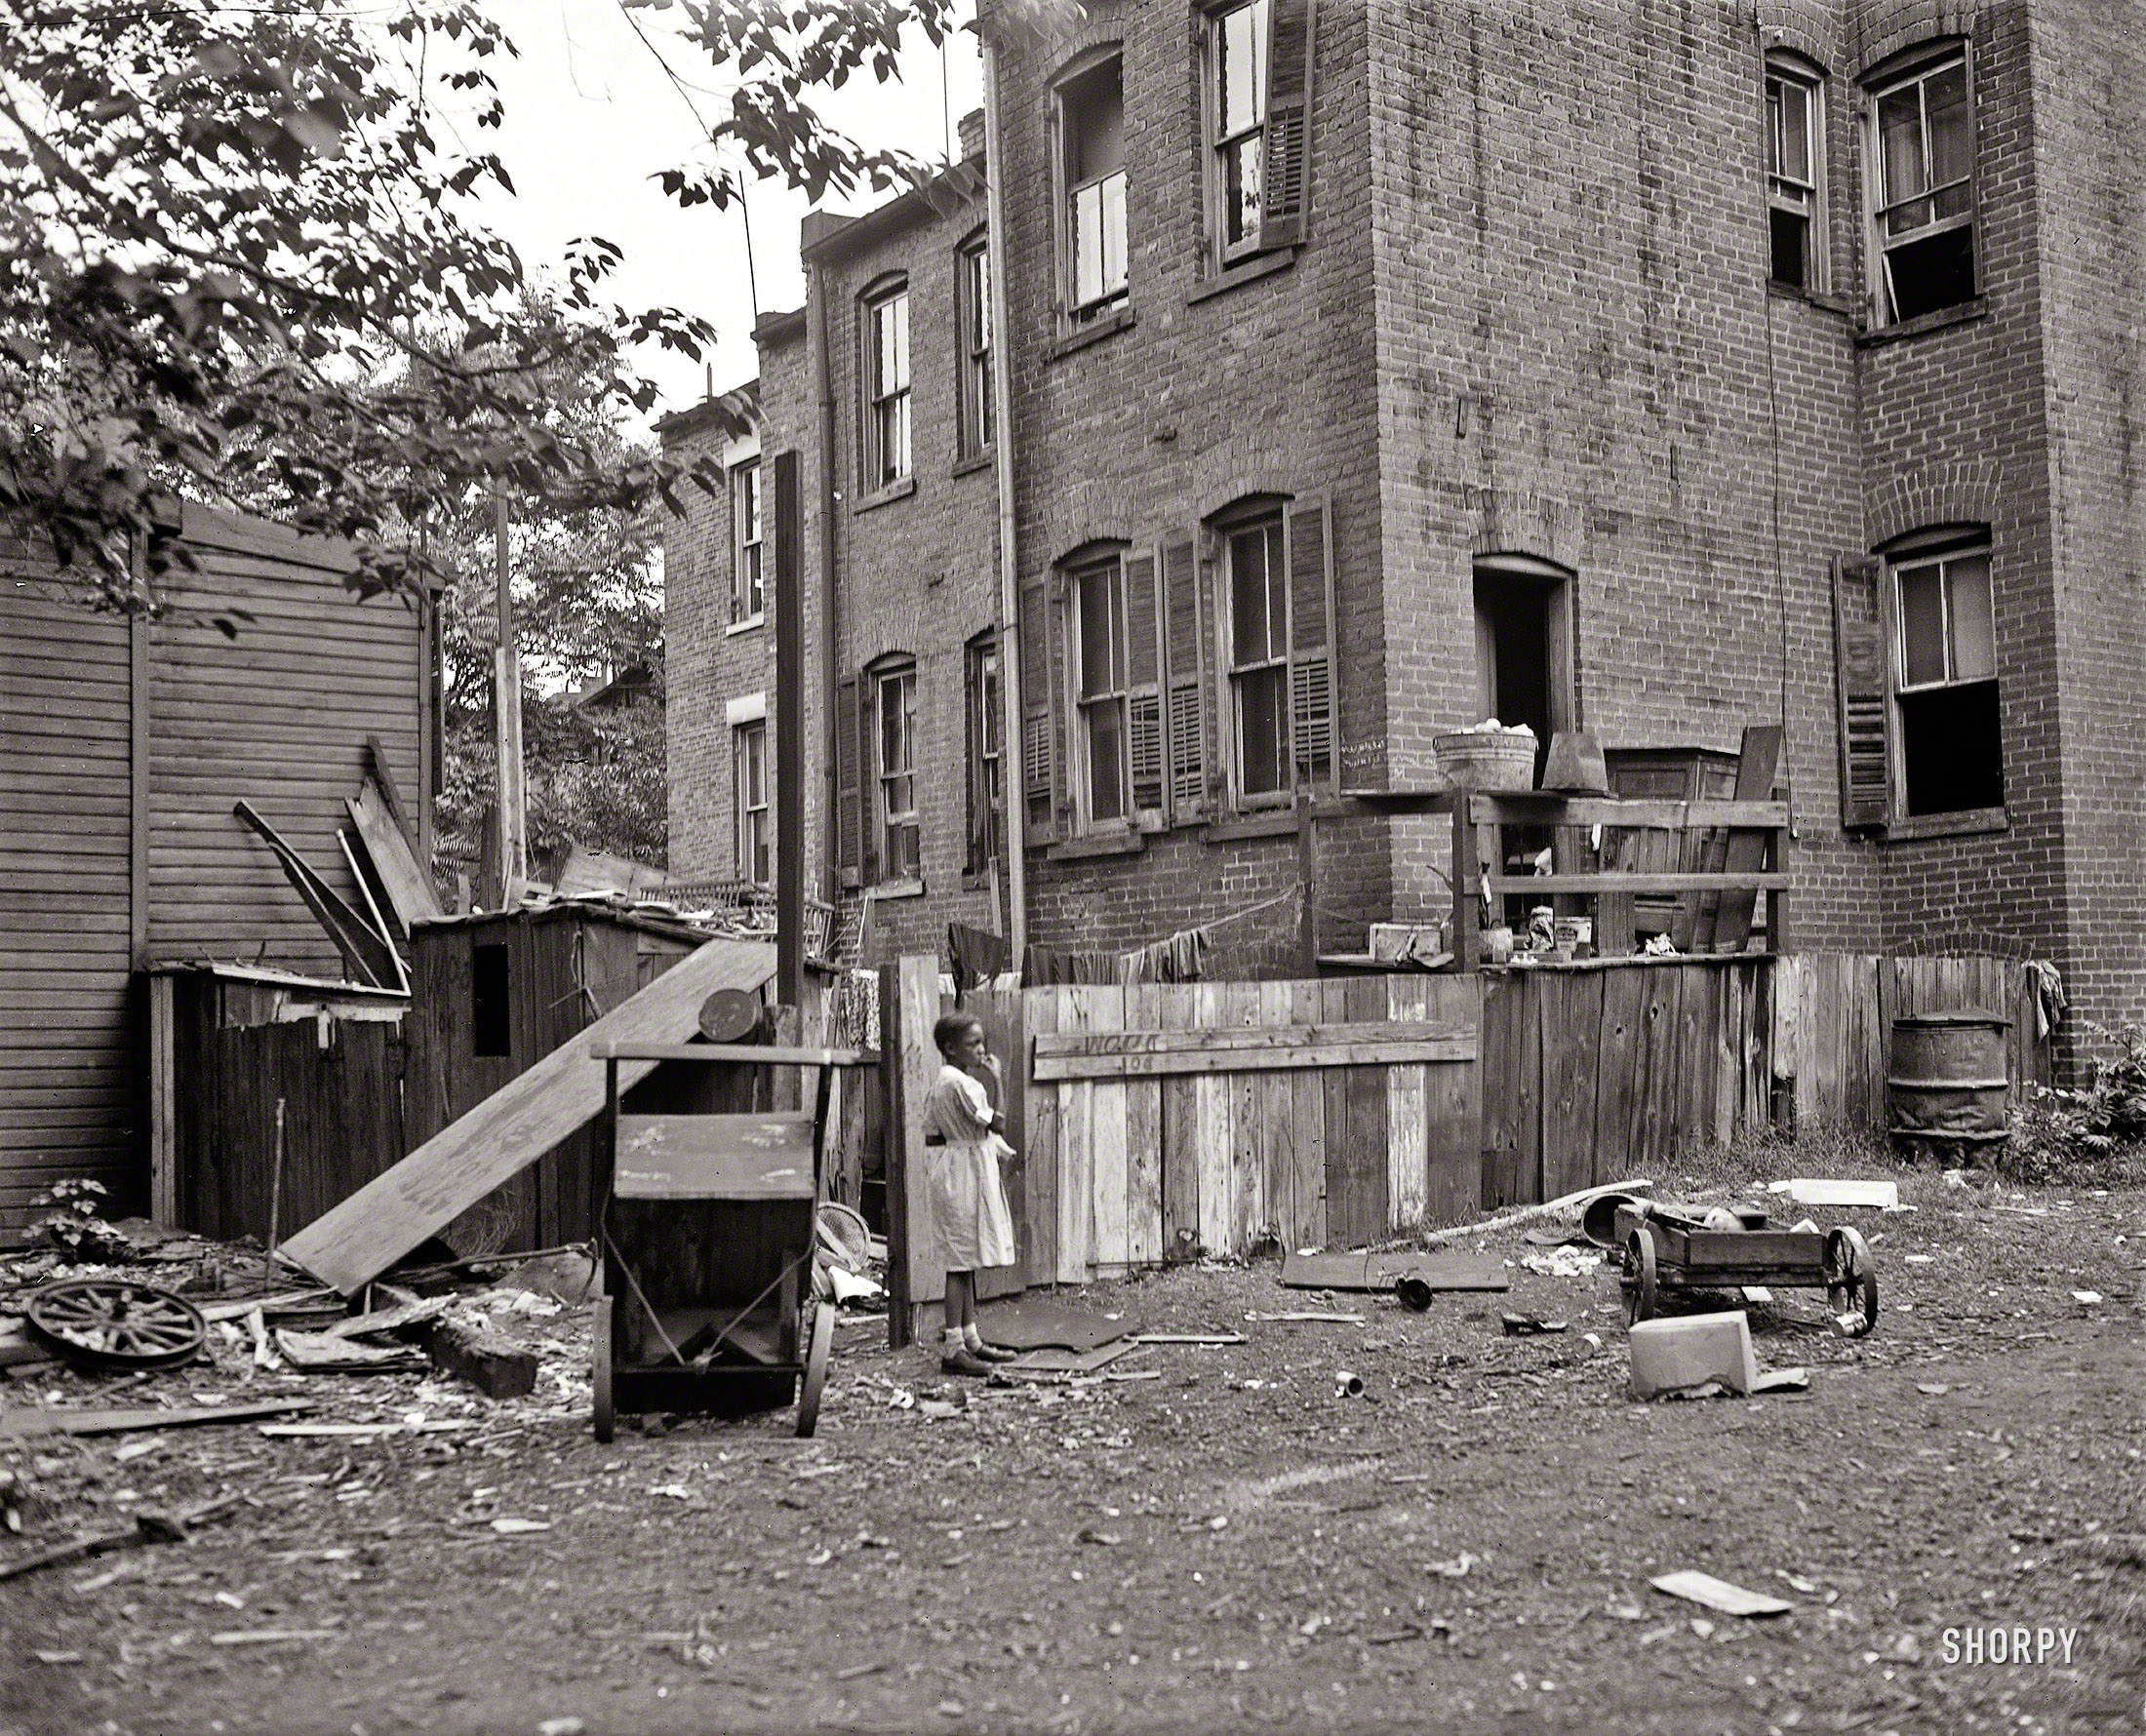 1935. Washington, D.C. "Alley dwelling. The clutter of filth, debris and tin cans all have highly utilitarian purposes. [Whatever that means.] Many of the houses are without gas, water, or electric connections." A Harris & Ewing photo from the mid-1930s, using what by then was the anachronistic medium of the 4x5 glass negative, but with subject matter that was on the cutting edge of what was being documented by the Federal Government's various New Deal (Farm Security Administration, etc.) photographic efforts. View full size.